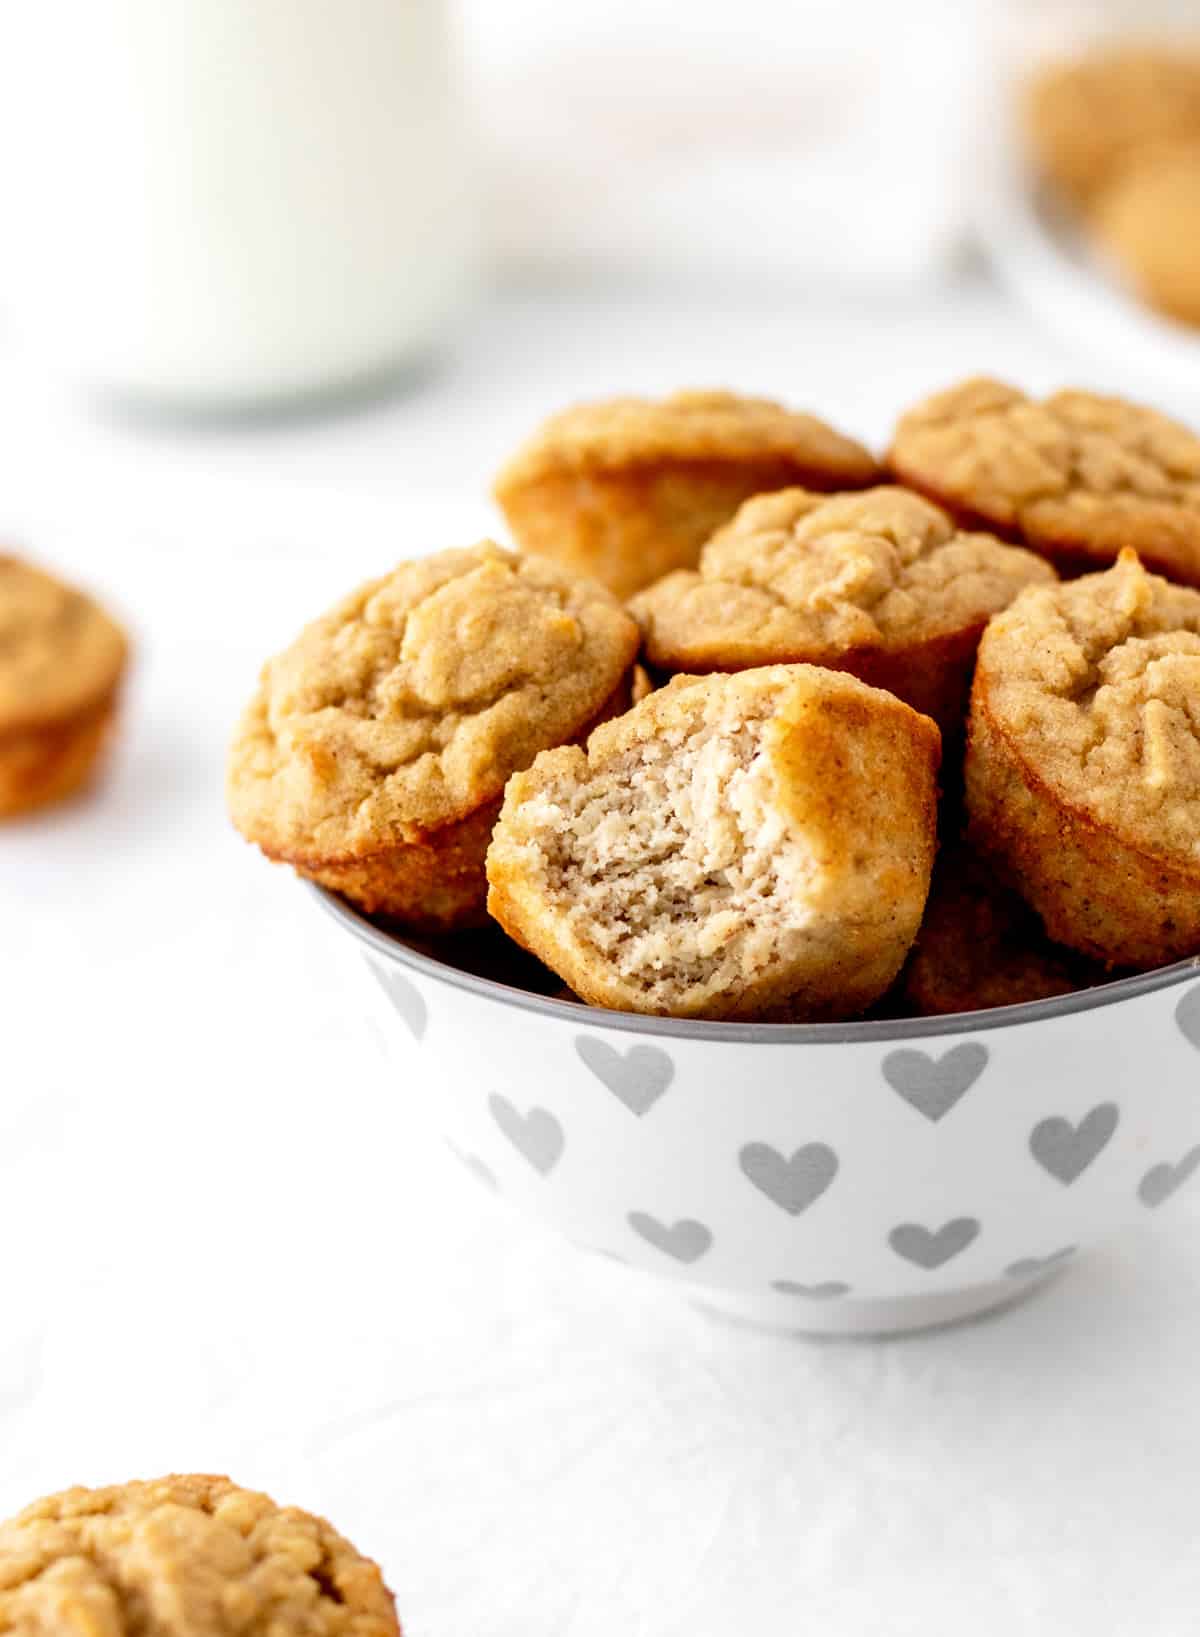 Mini banana bread muffins in a white bowl with gray hearts.